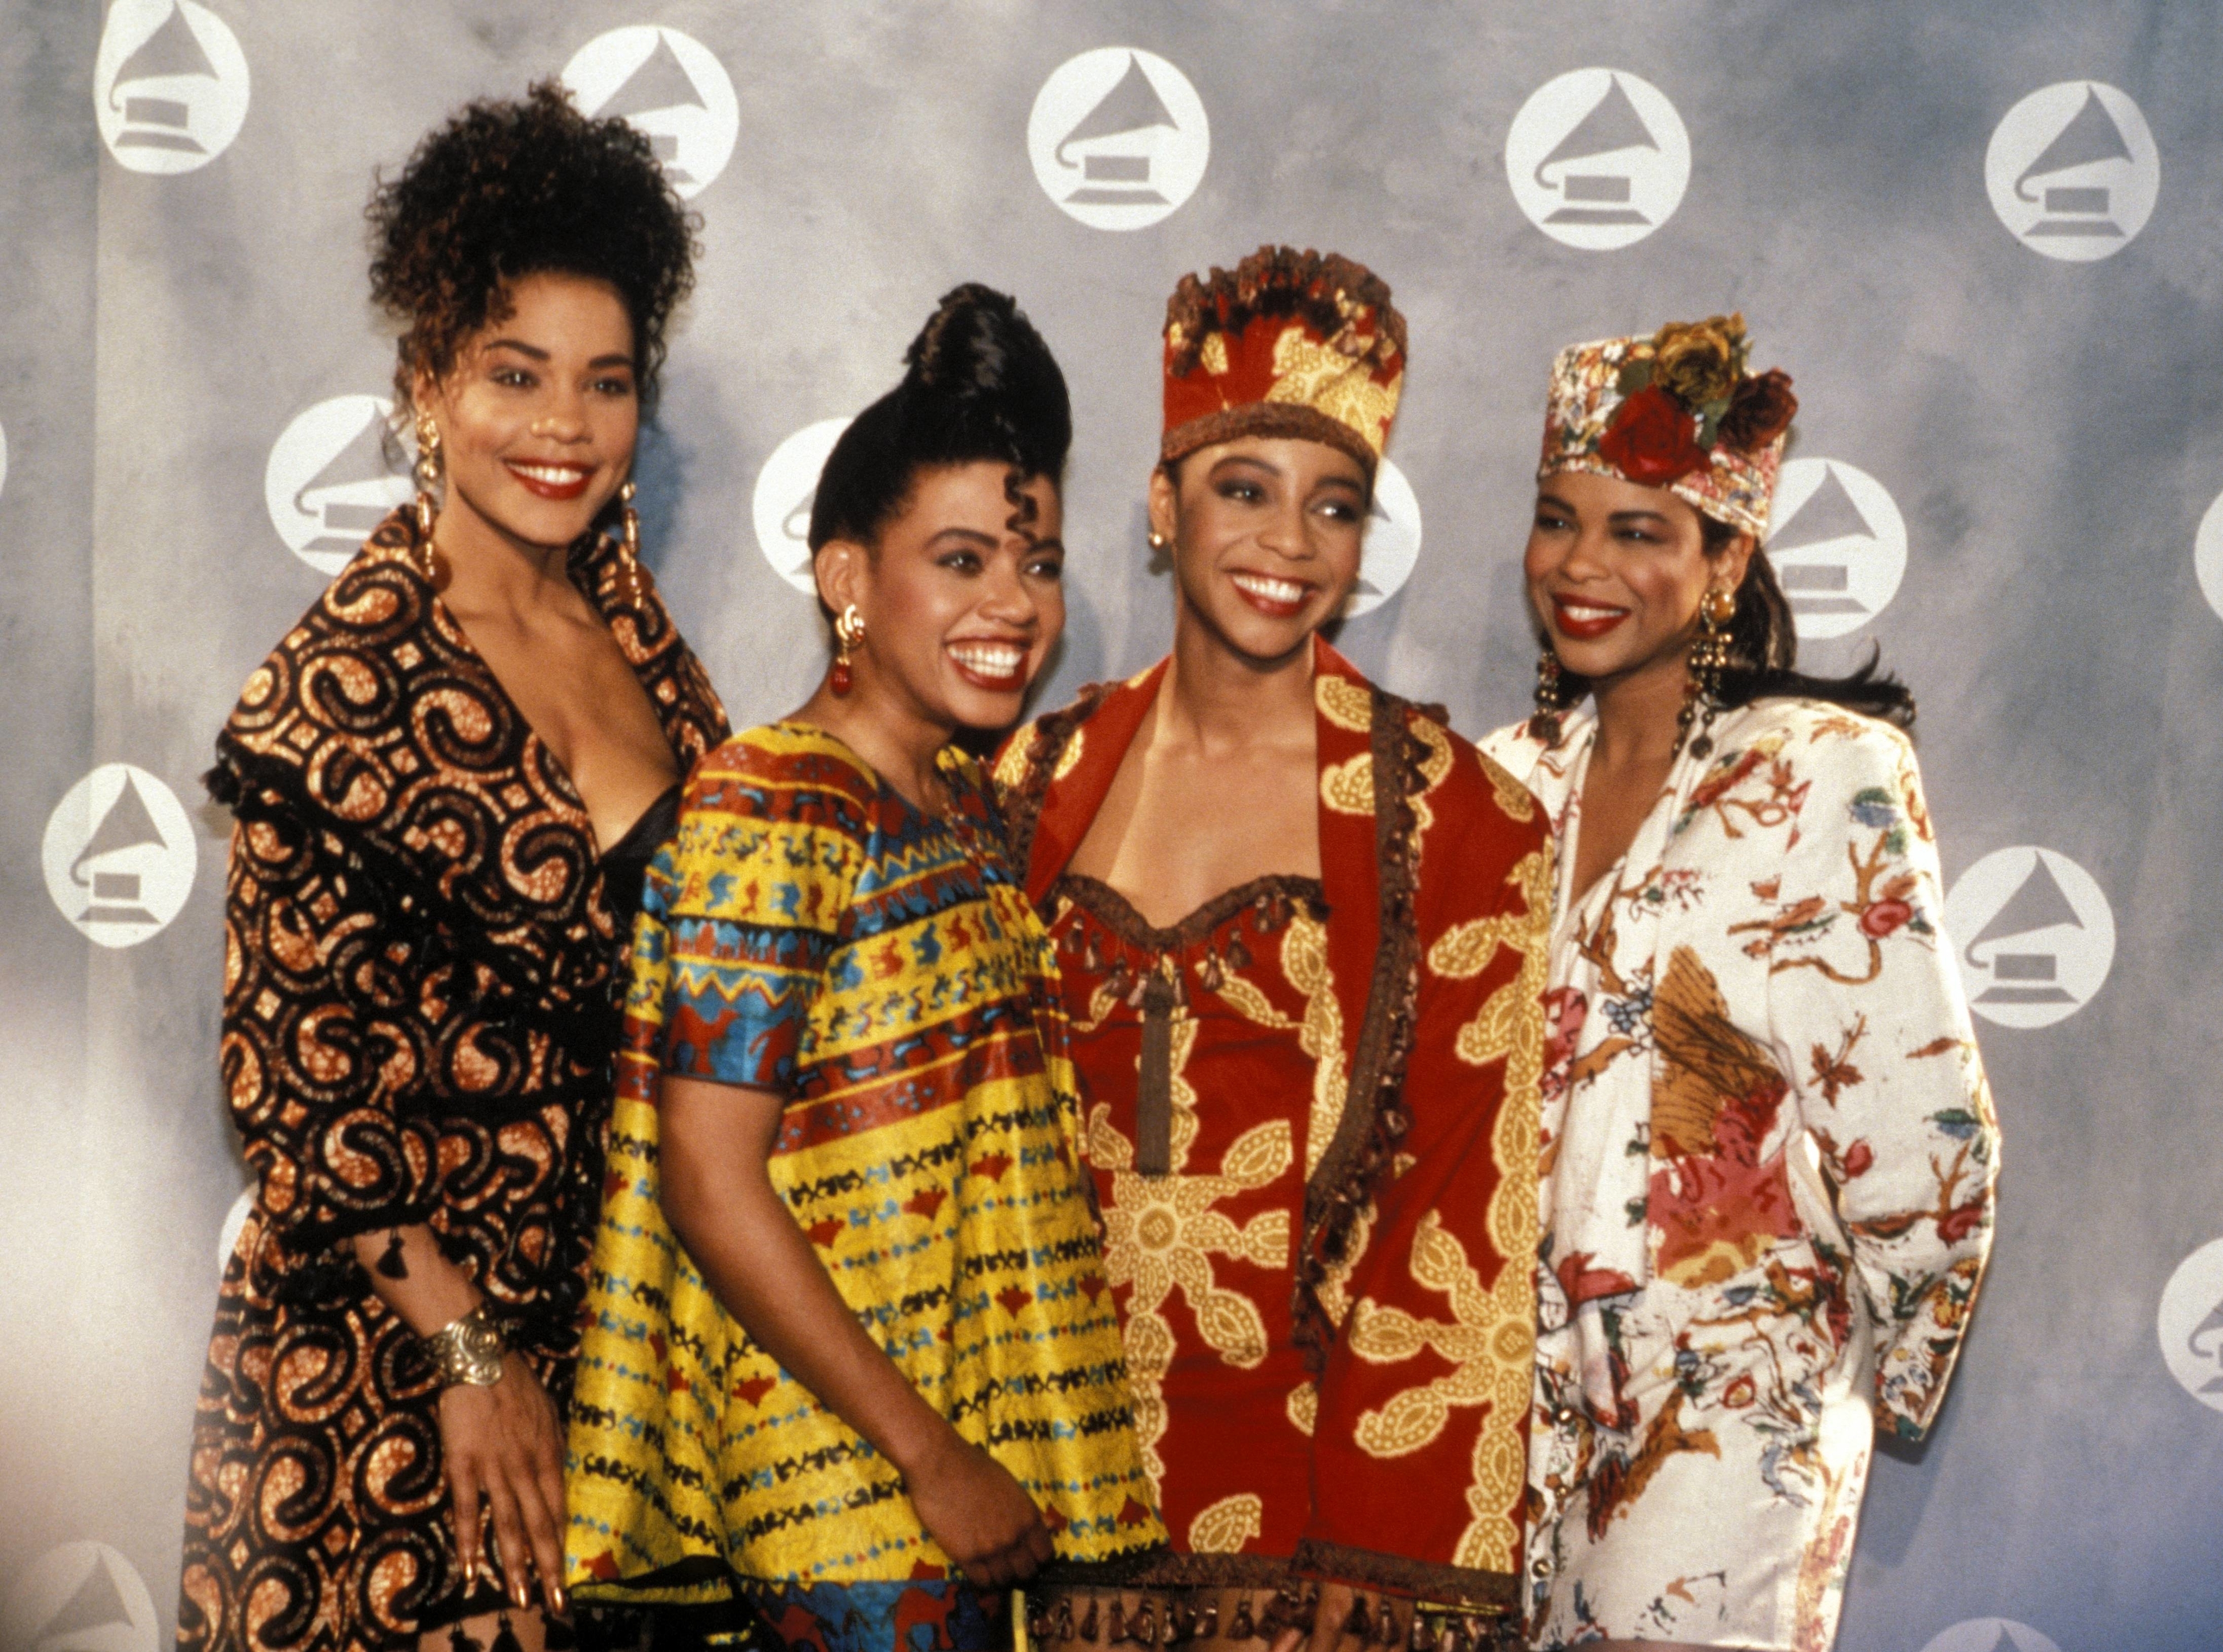 Four women at an event wearing vibrant traditional African-inspired attire